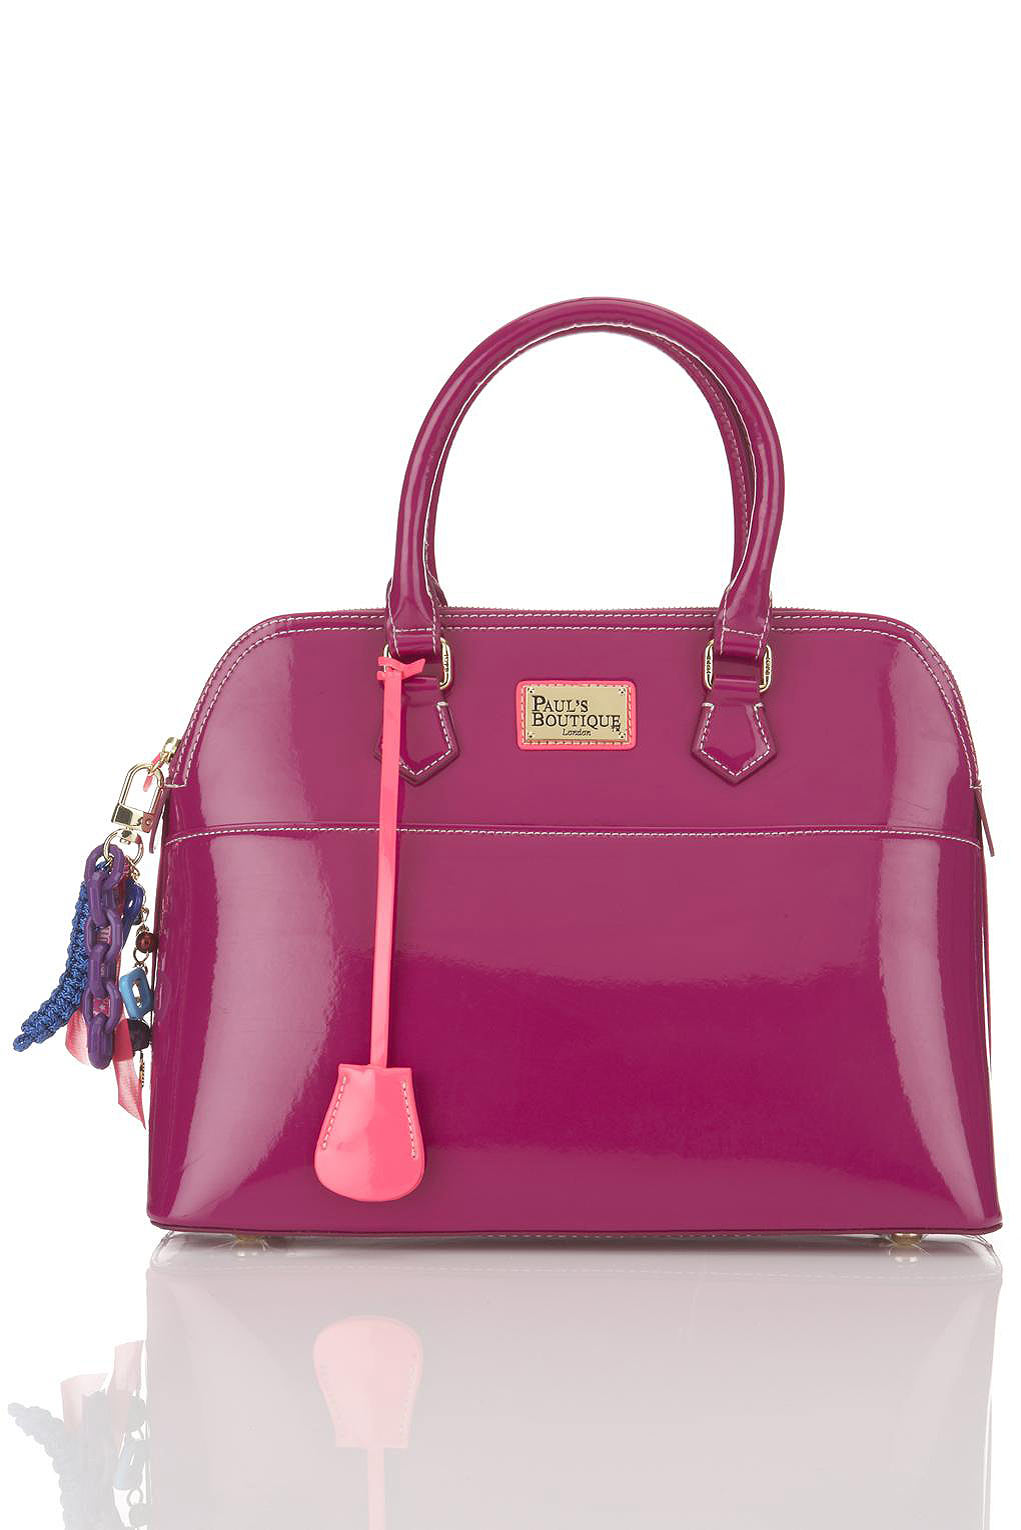 Topshop Maisy Bag By Pauls Boutique in Purple | Lyst